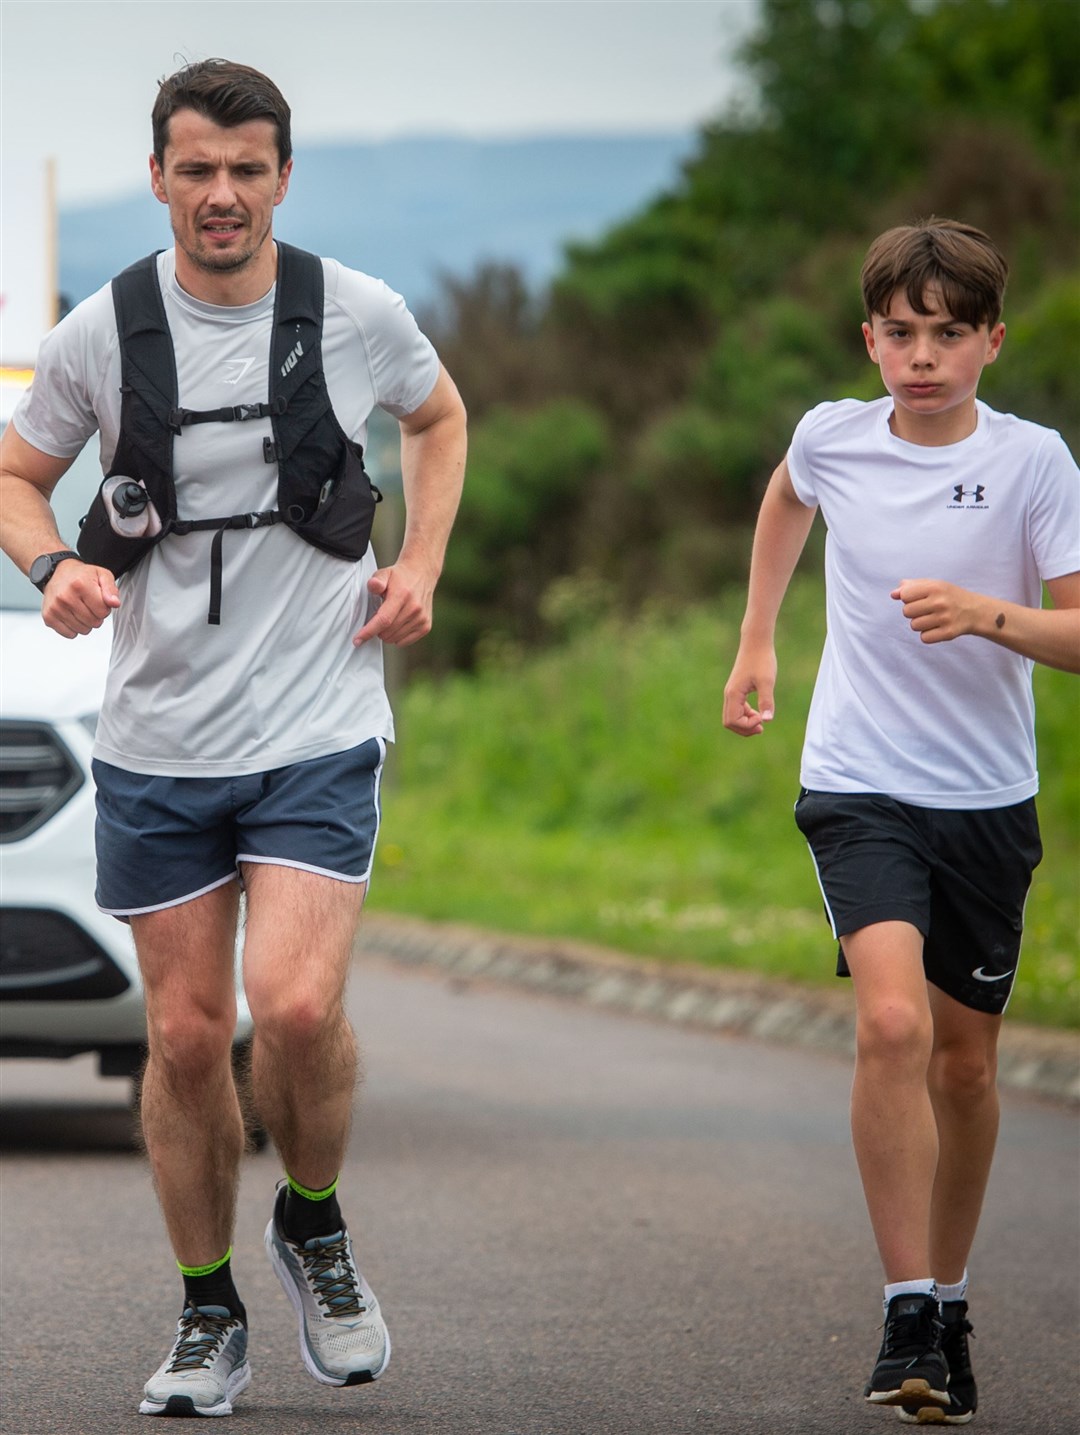 Mackay and son Dylan, who ran a marathon with him.